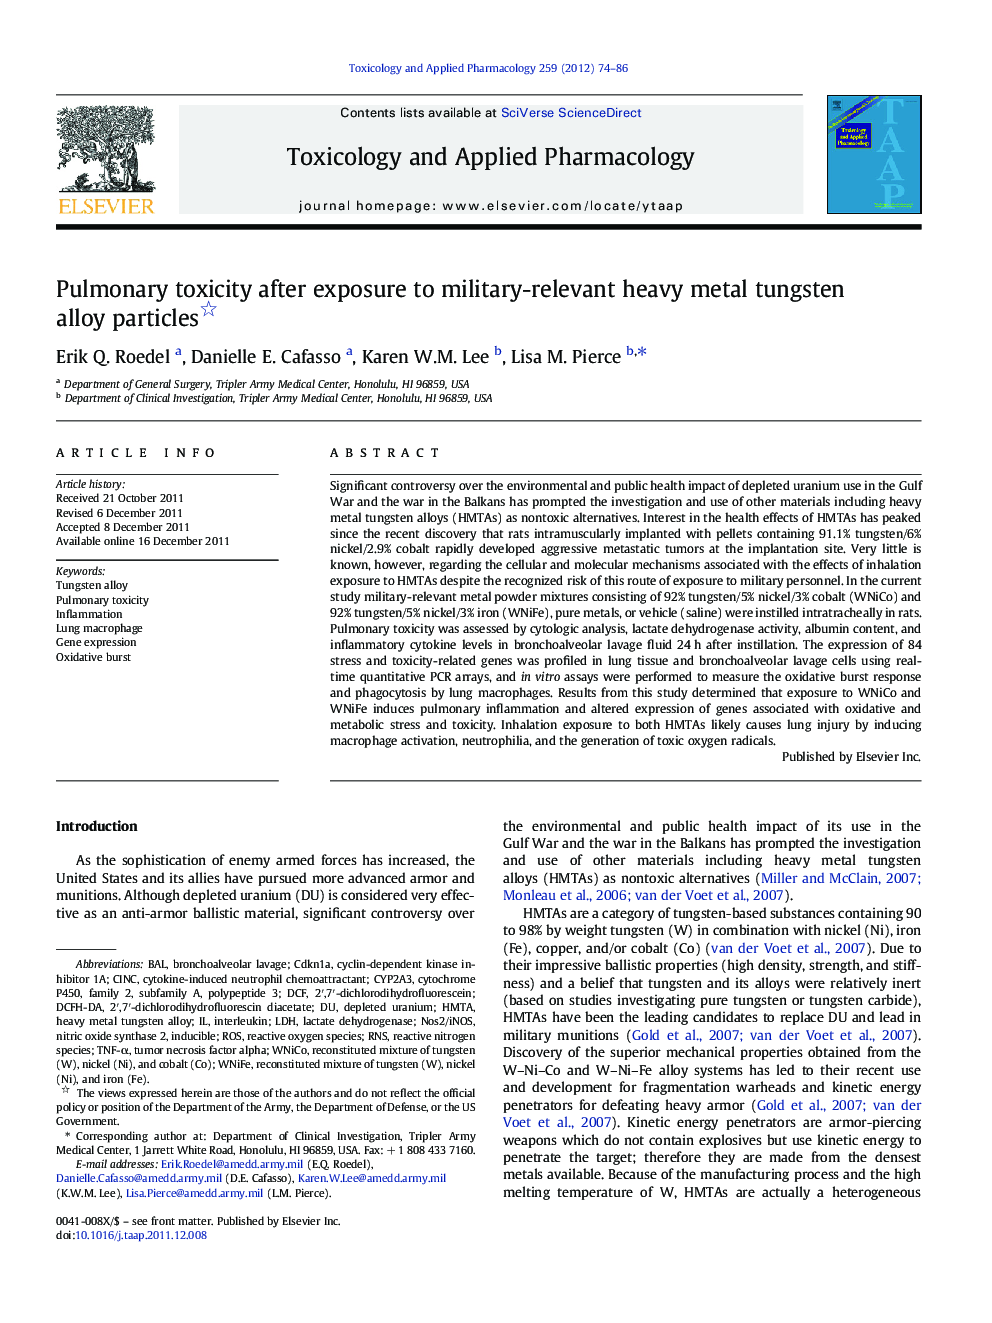 Pulmonary toxicity after exposure to military-relevant heavy metal tungsten alloy particles